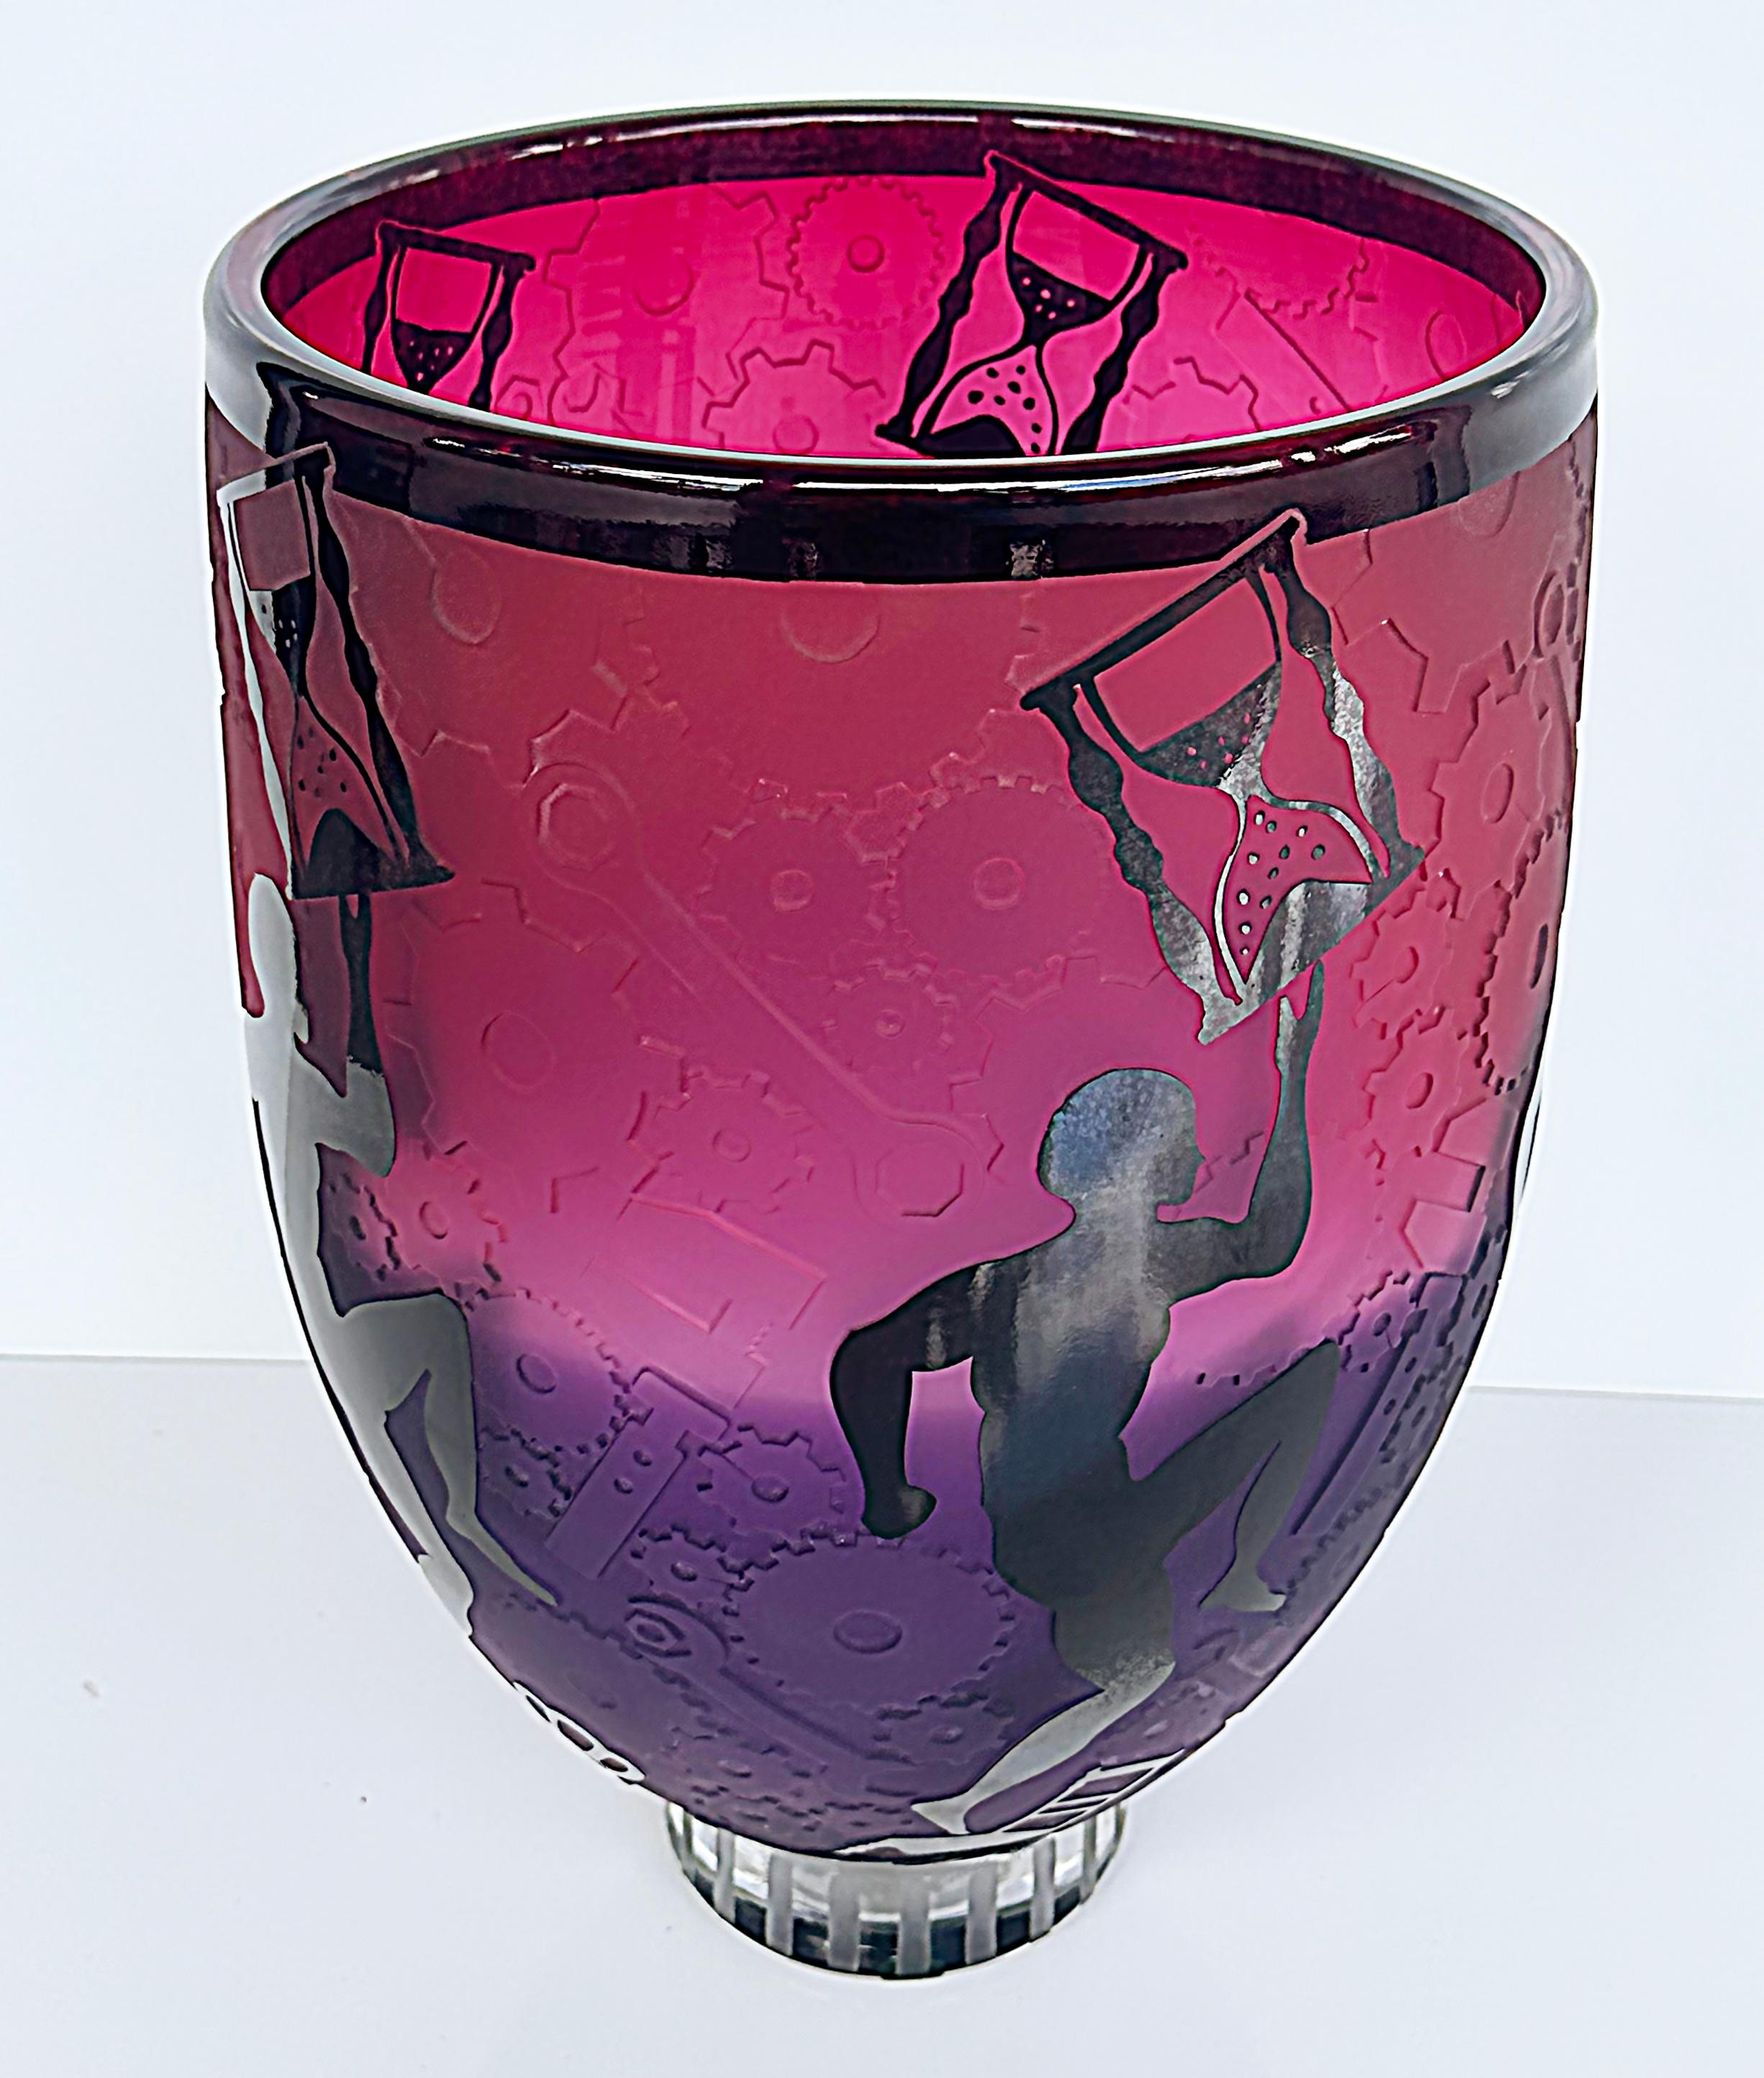 Duncan McClellan Etched Overlay Art Glass Cameo Vase, circa 2005, Artist Signed

Offered for sale is a Duncan McClellan etched and overlay art glass cameo vase circa 2005. McClellan is a Florida artist who has achieved national recognition for his